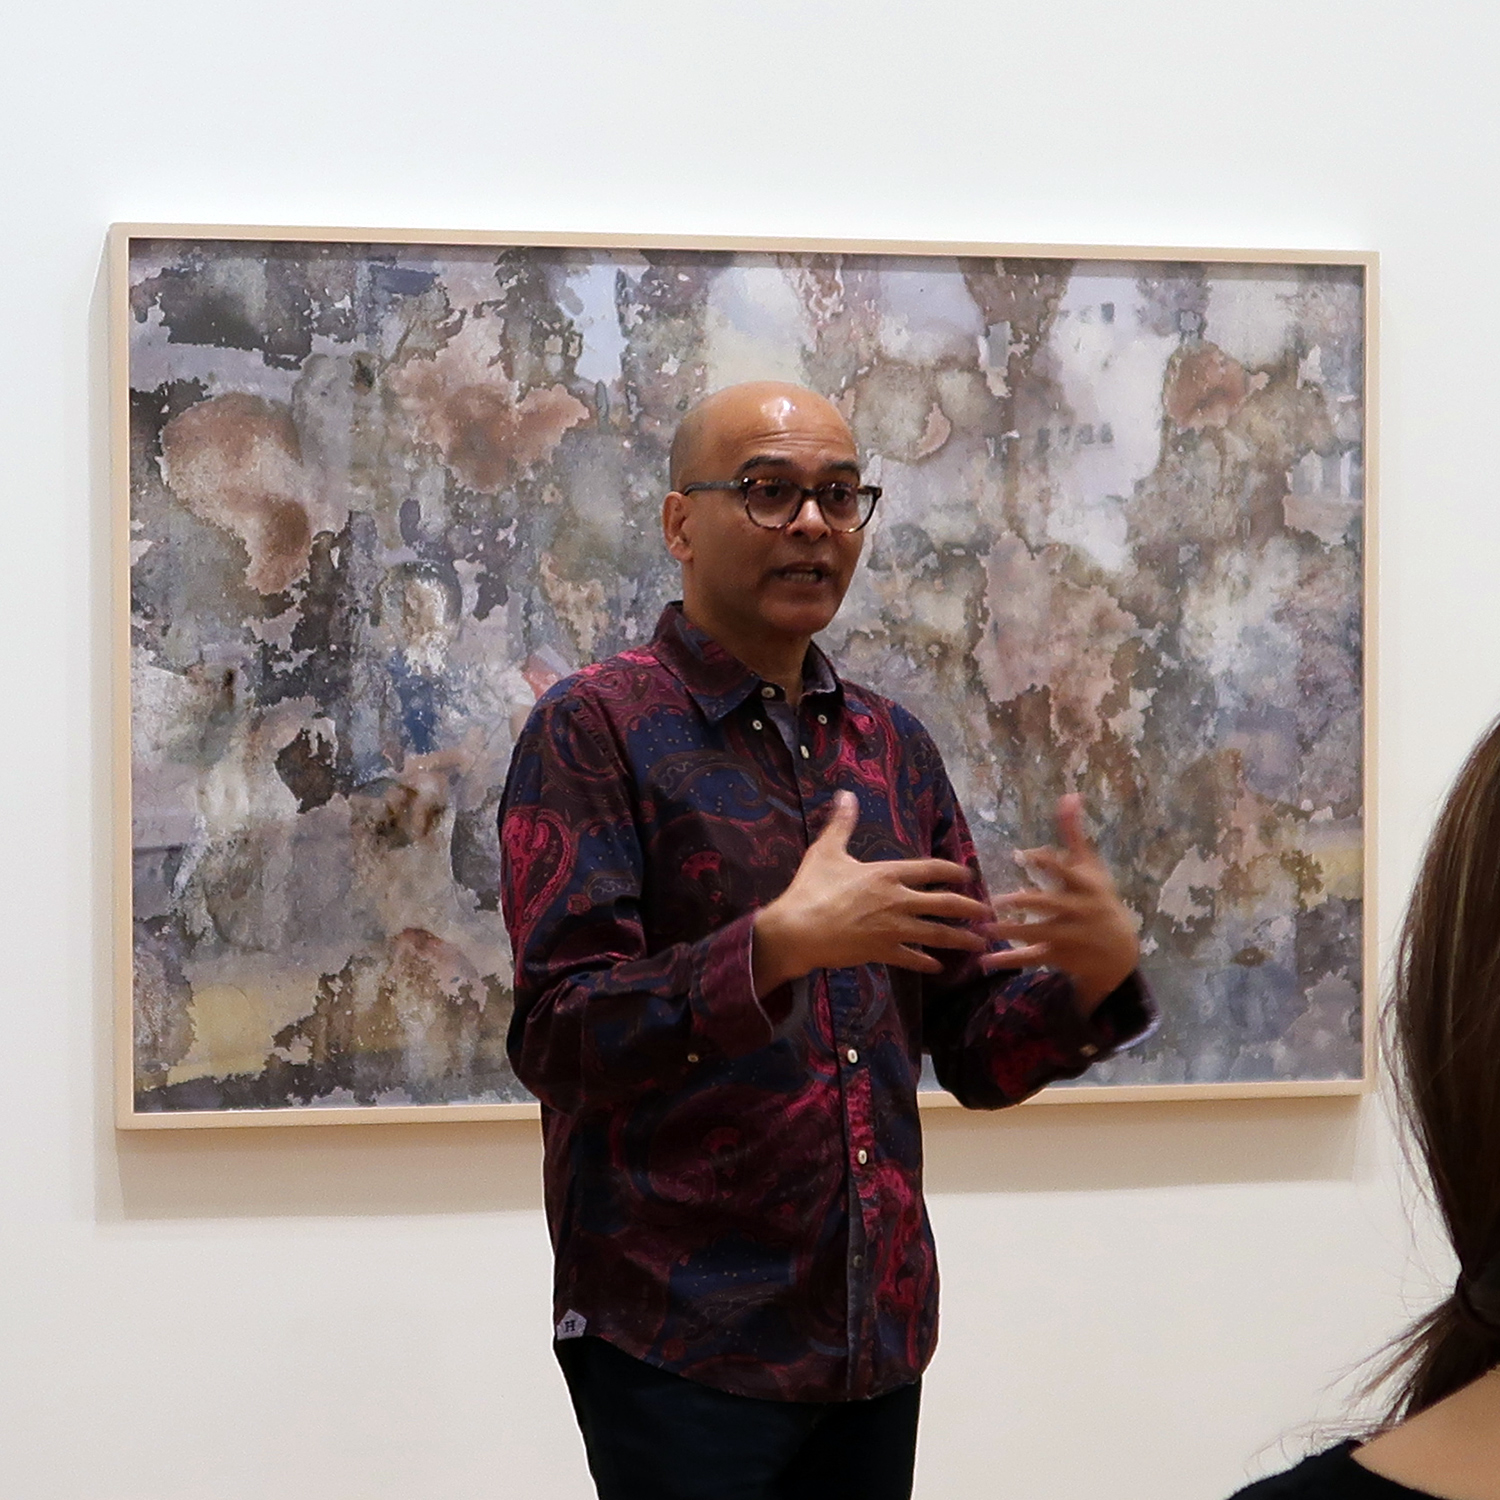 A bald man in glasses talks and gestures in front of a framed artwork on the wall behind him